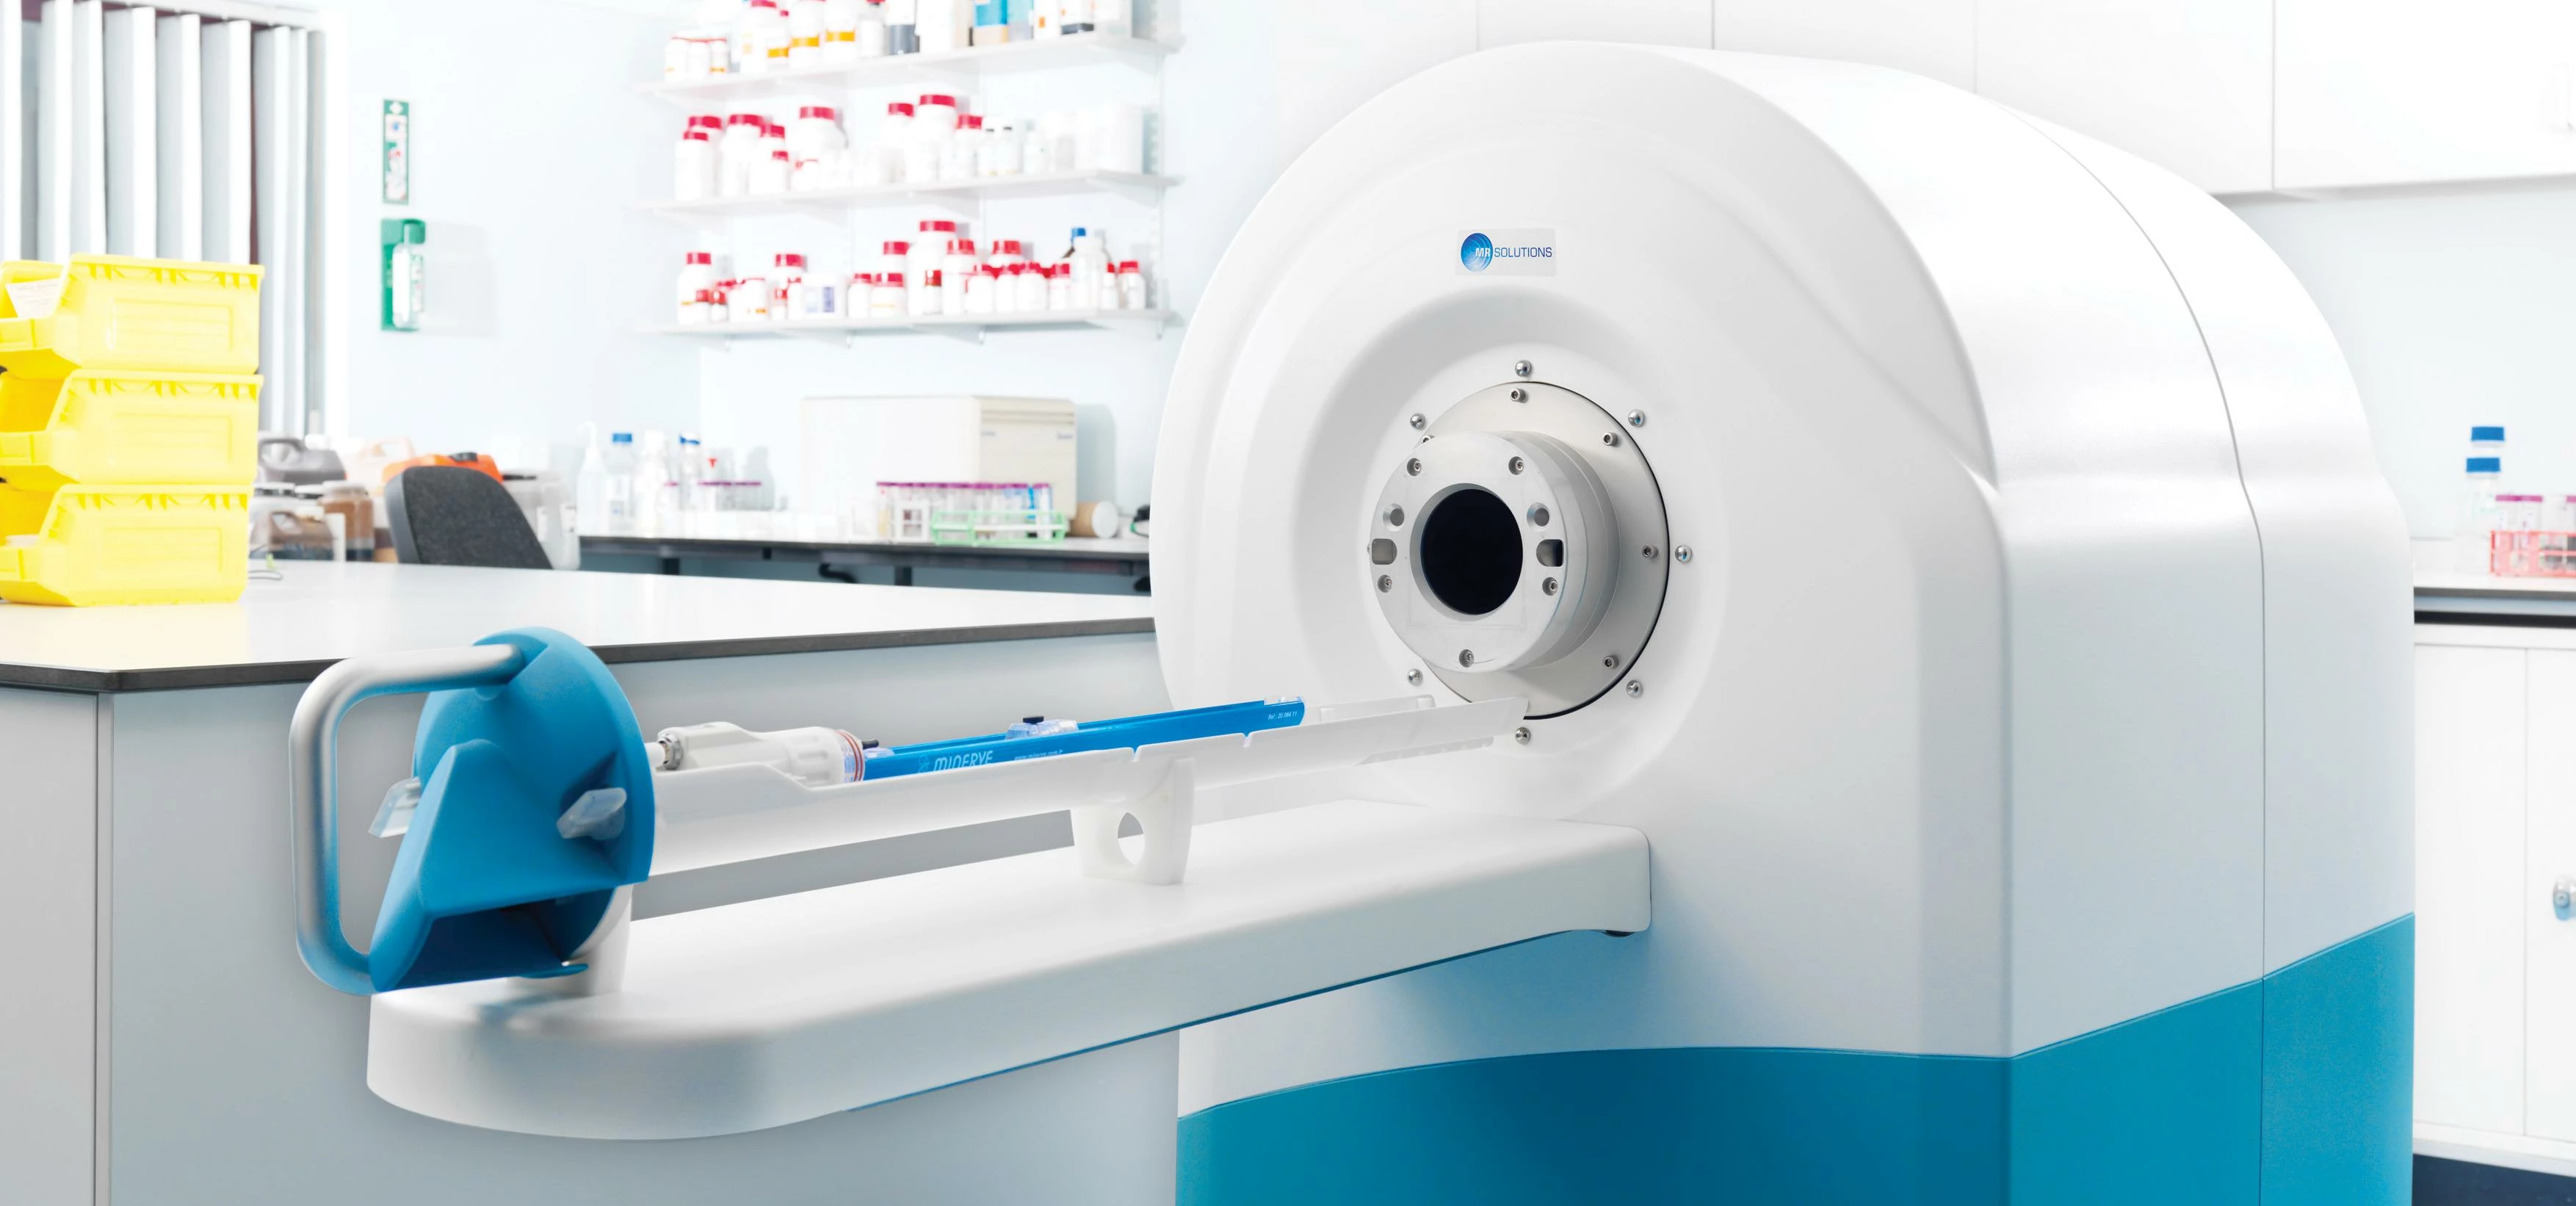 Preclinical MRI scanner from MR Solutions